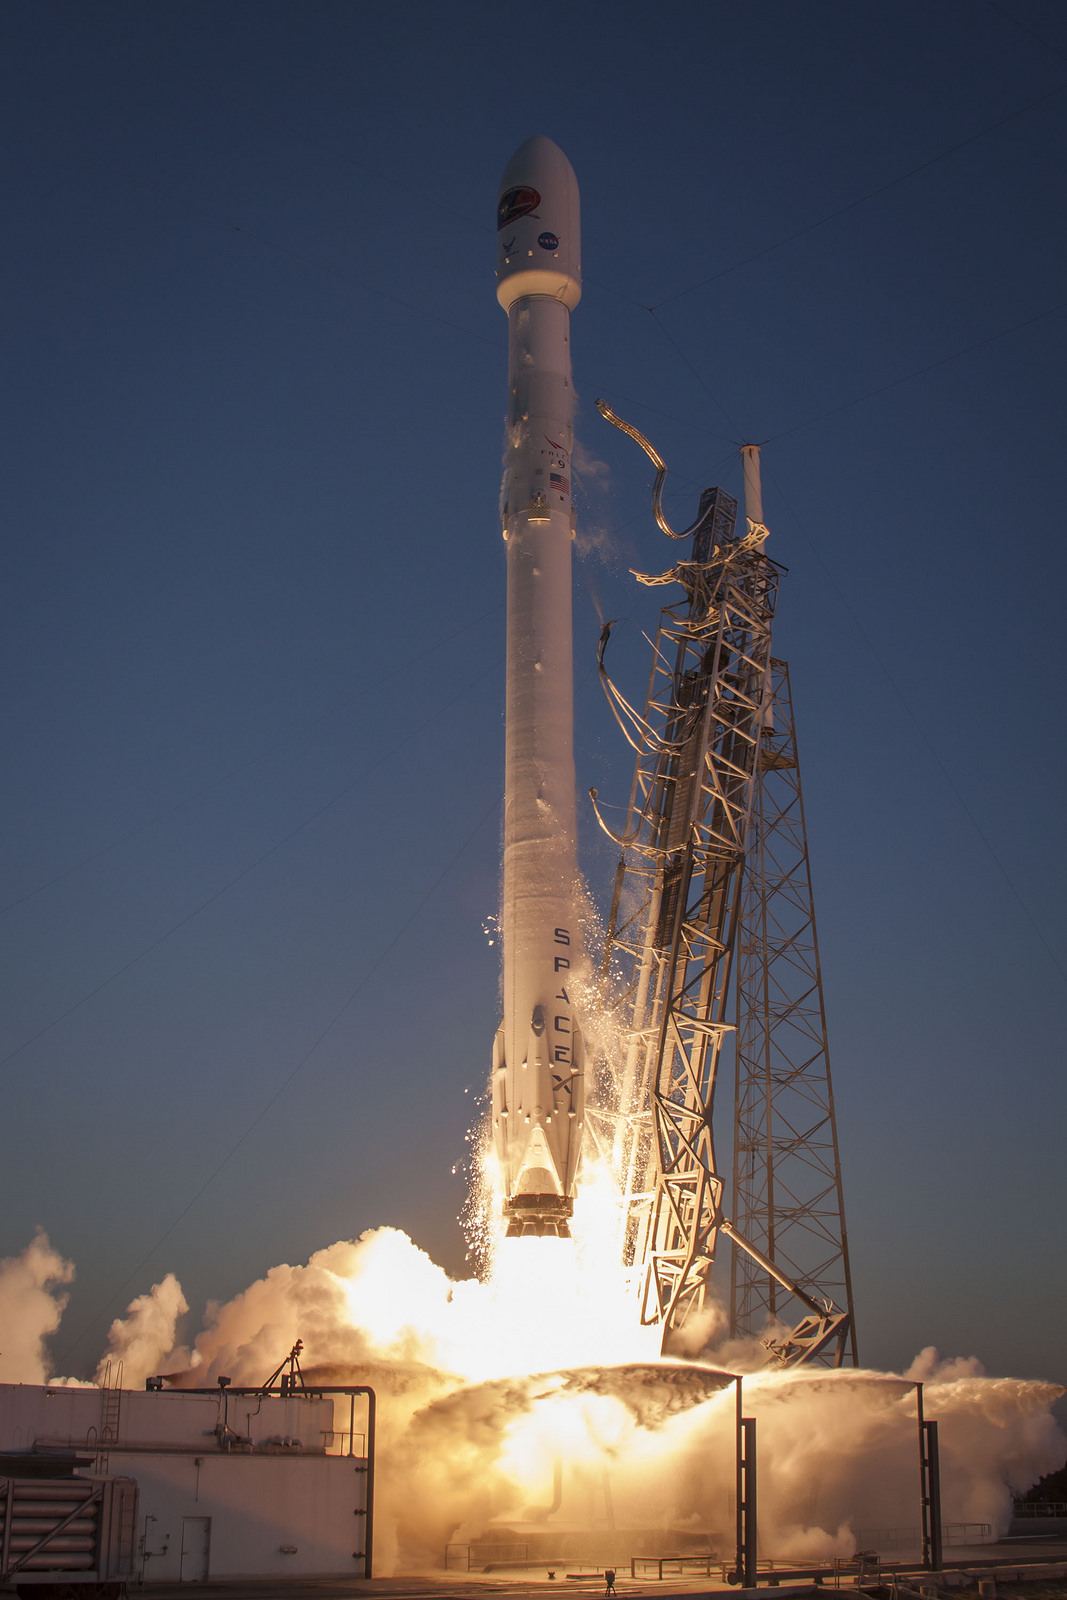 spacex3 Falcon 9 lifted off from SpaceX Launch Complex